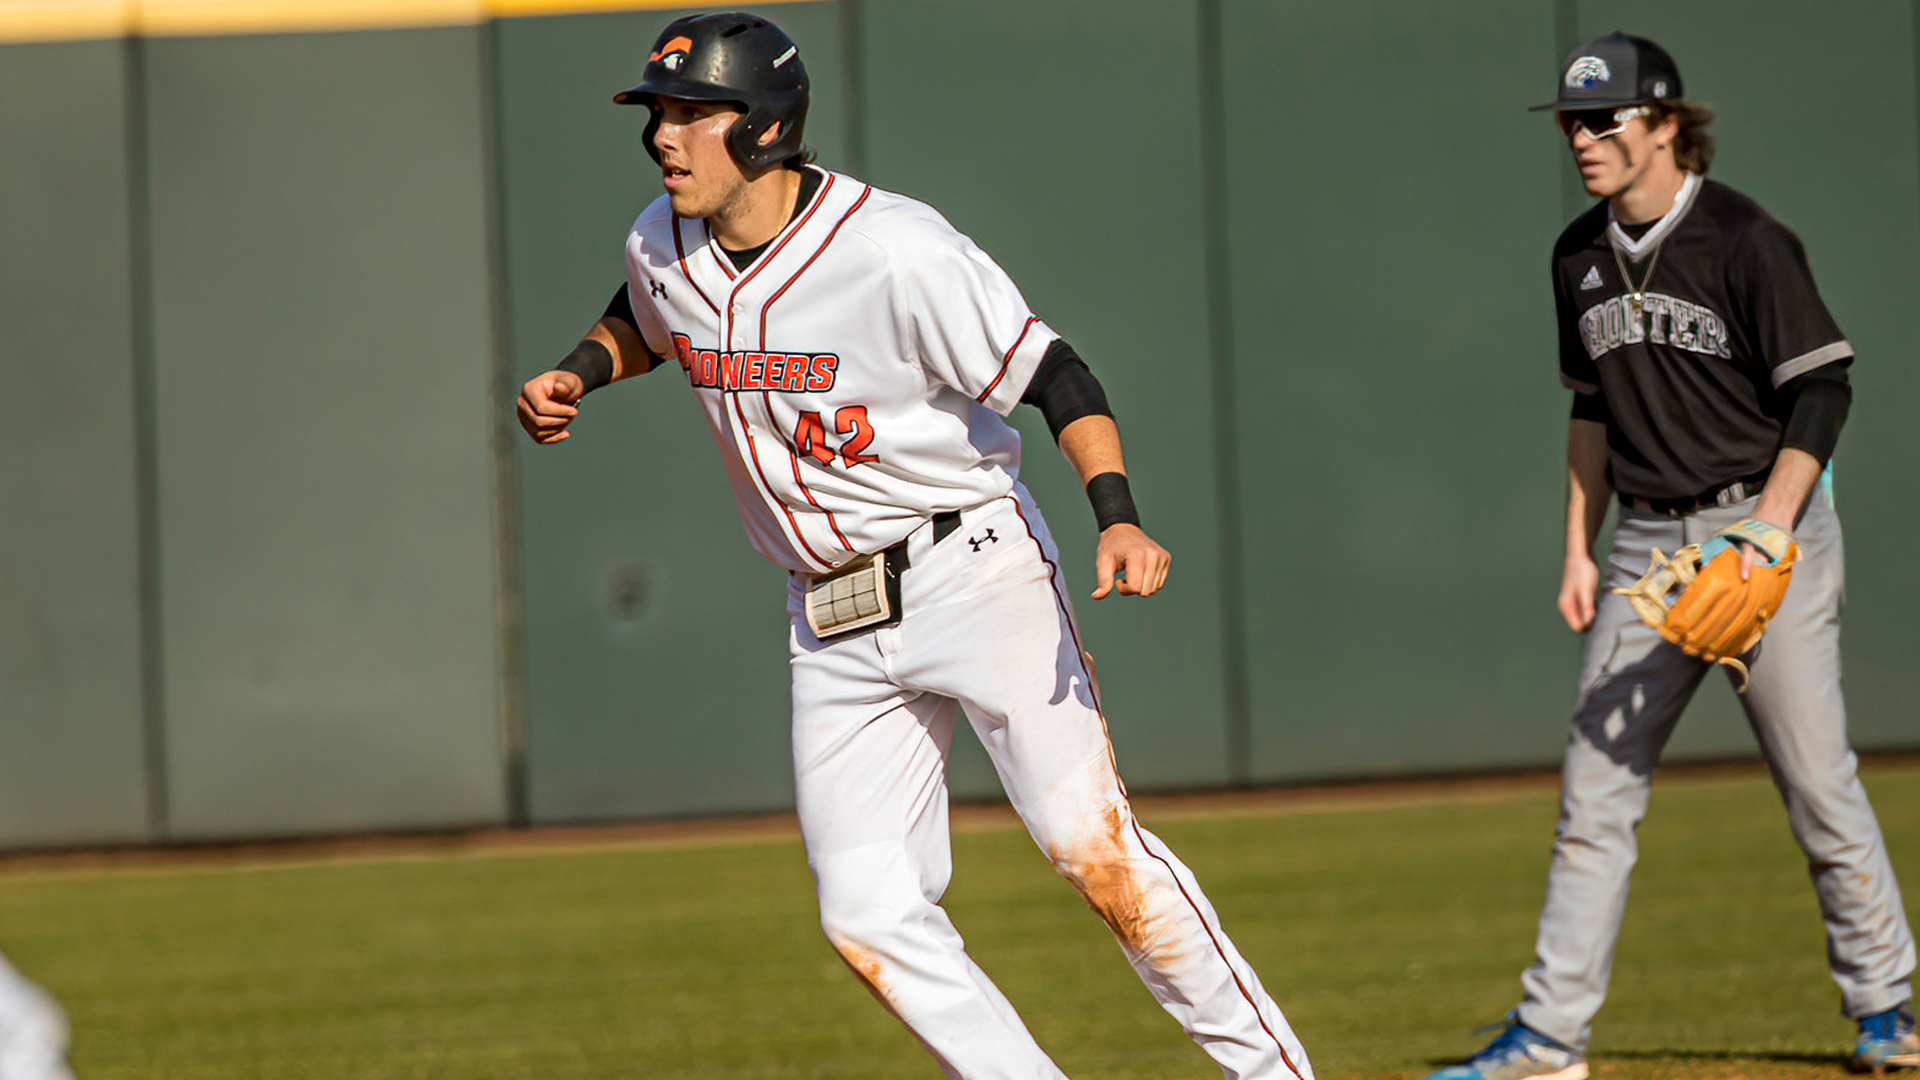 Anderson rallies late to 9-7 win at Tusculum